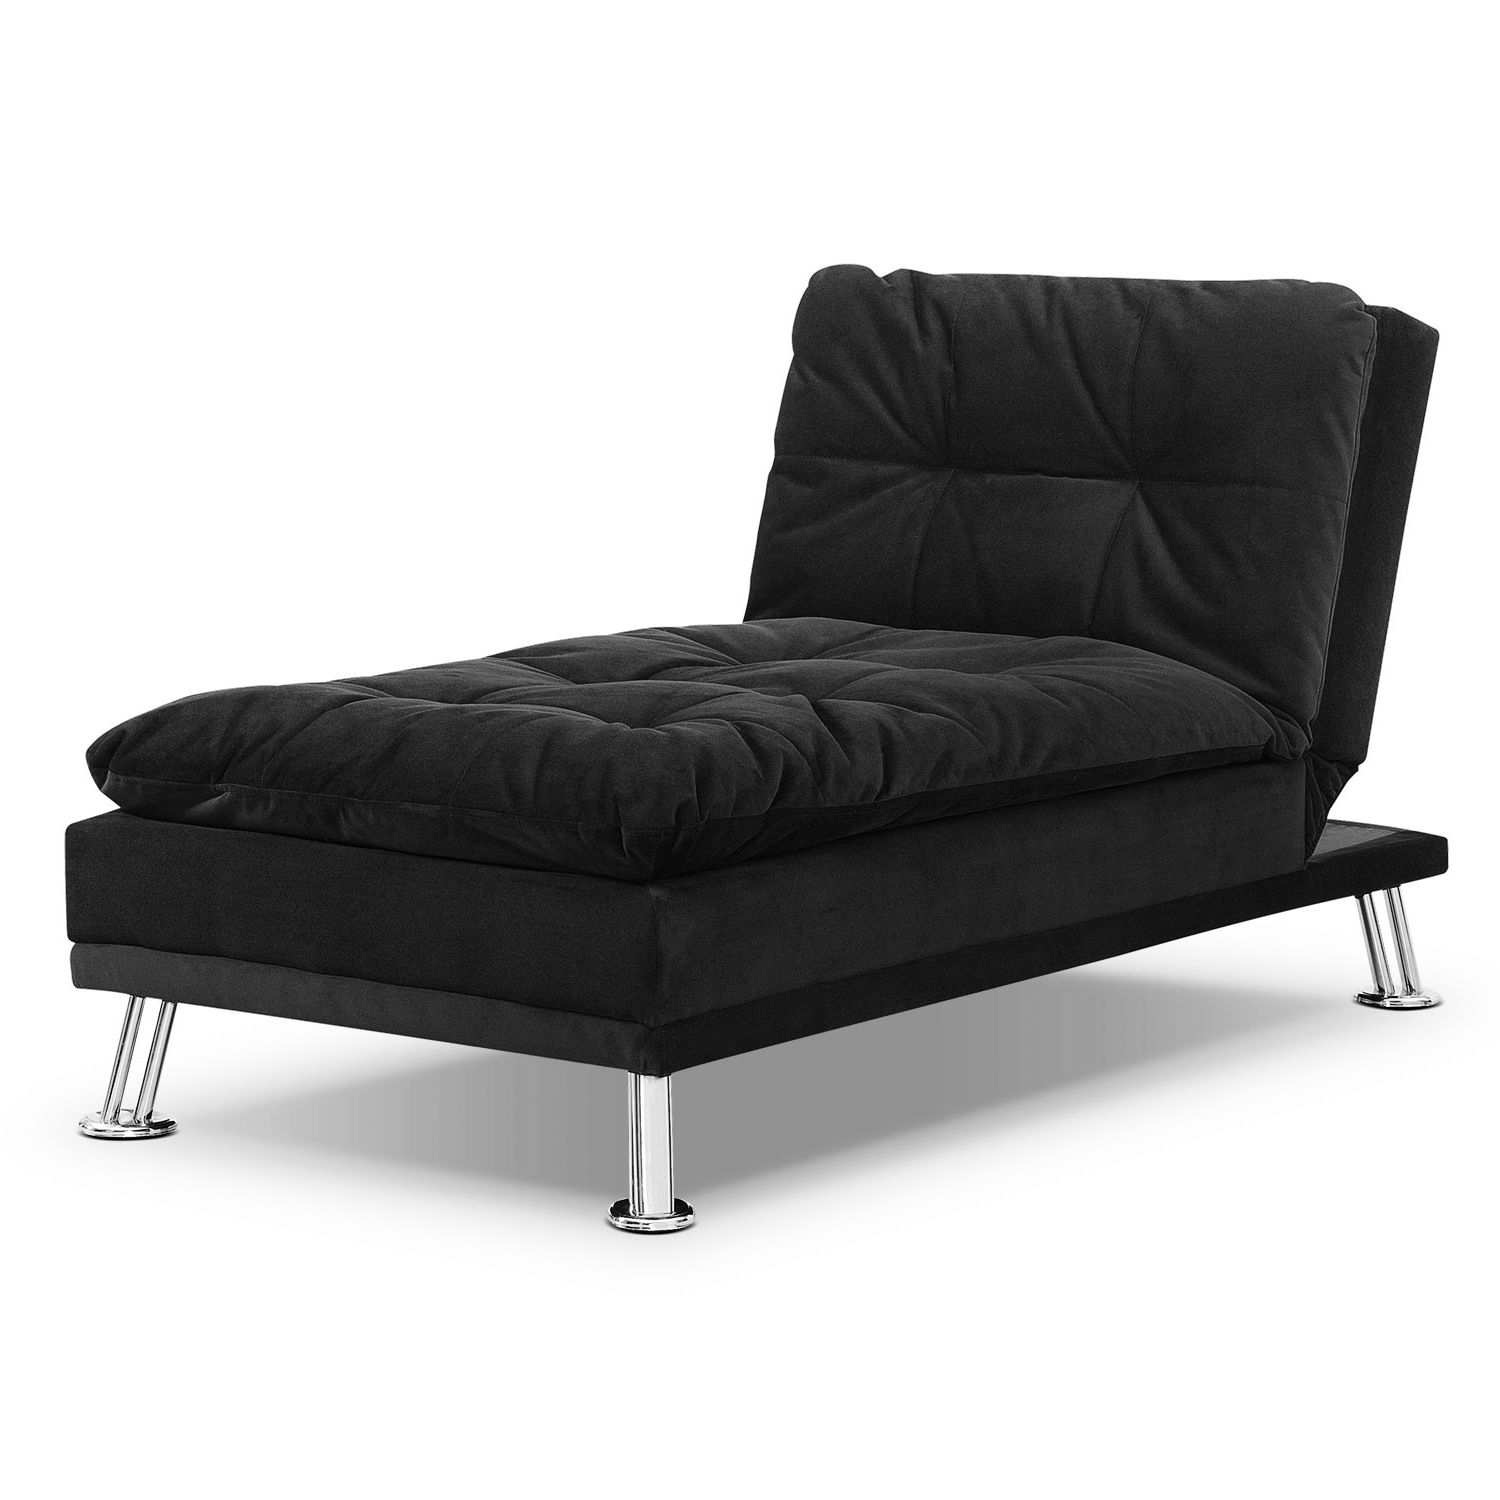 Waltz Futon Sofa Bed With Chaise – Black (View 7 of 15)